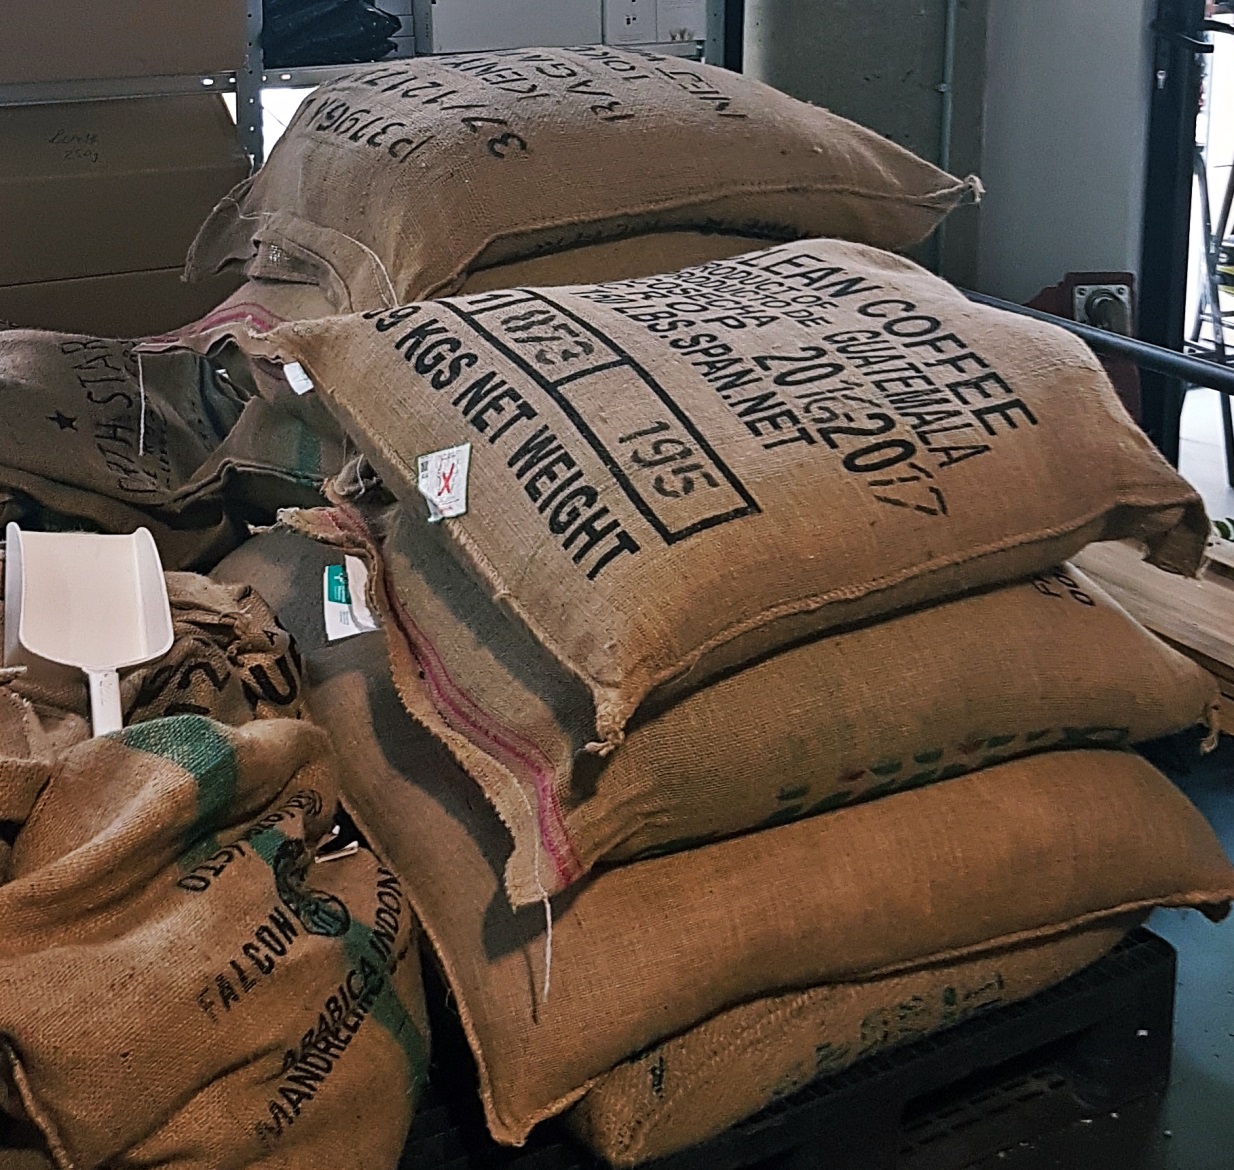 Bags of coffee beans - Review of North Star Coffee Shop by BeckyBecky Blogs